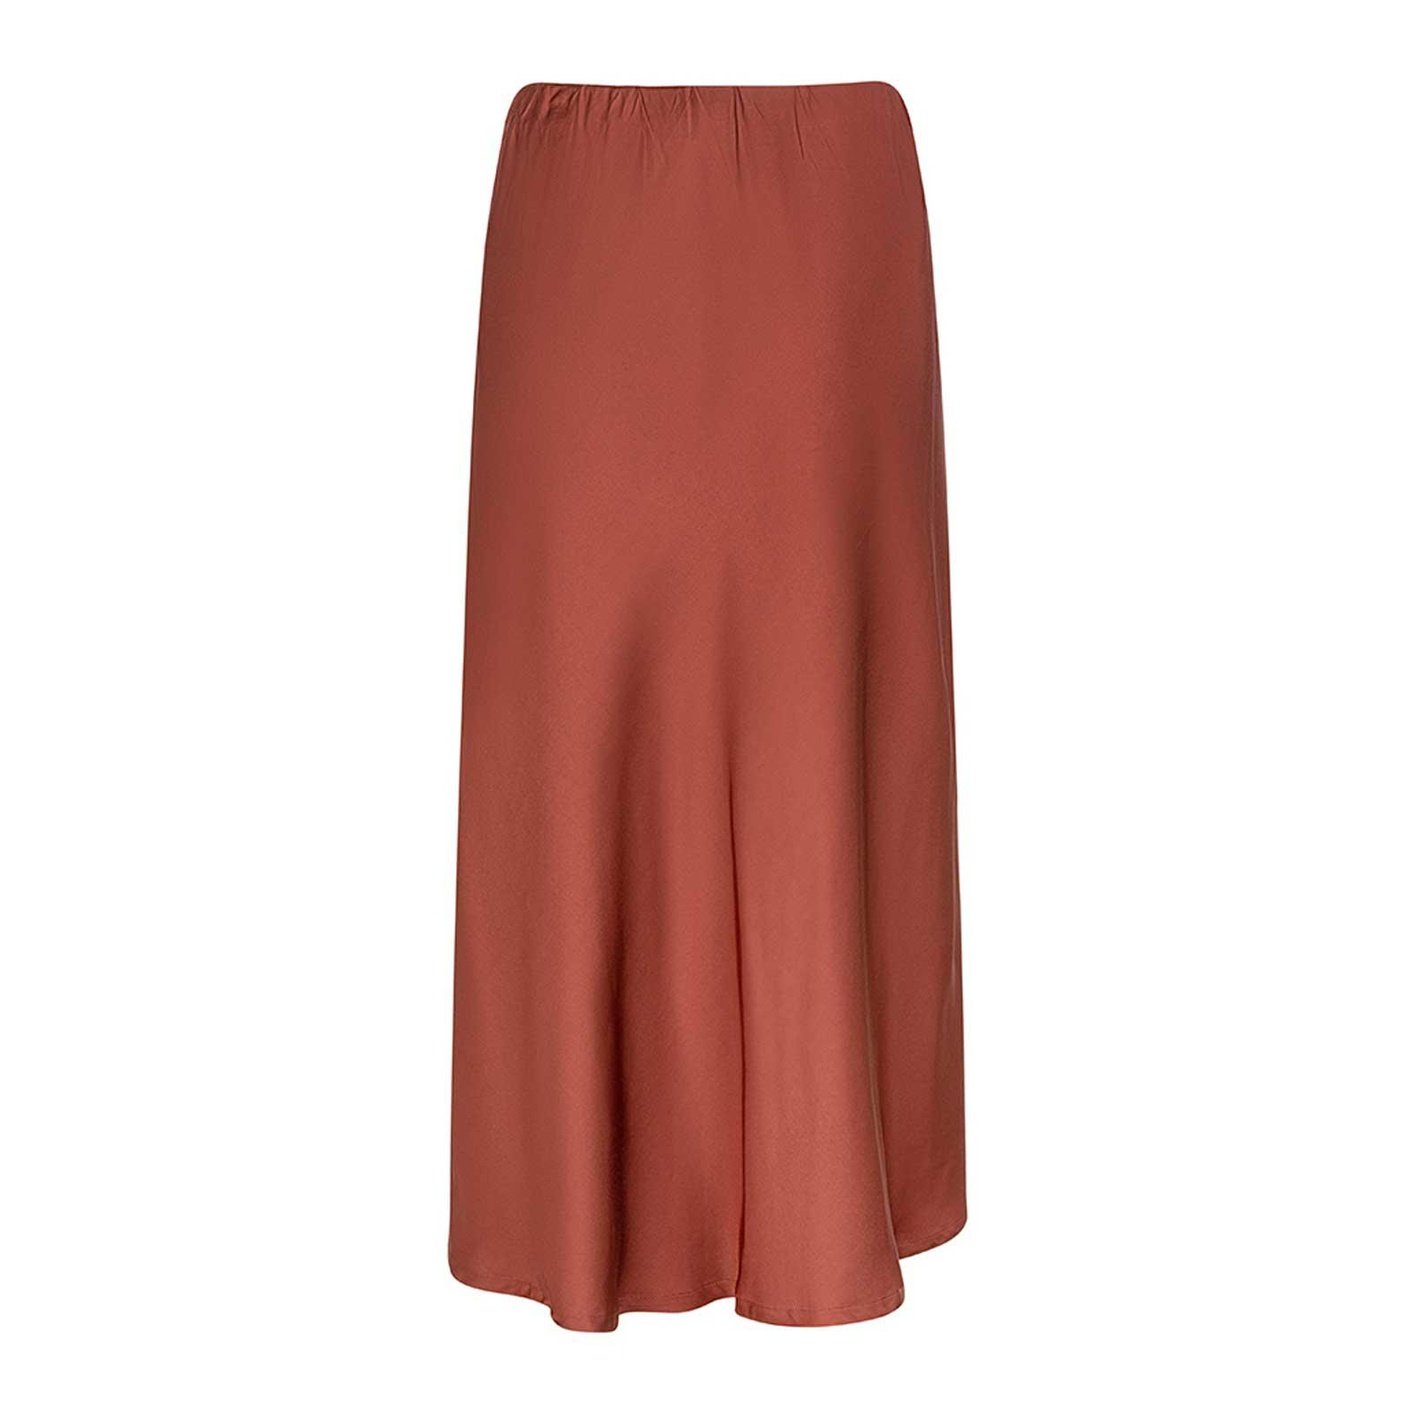 RELYN SKIRT - rubytuesday-store